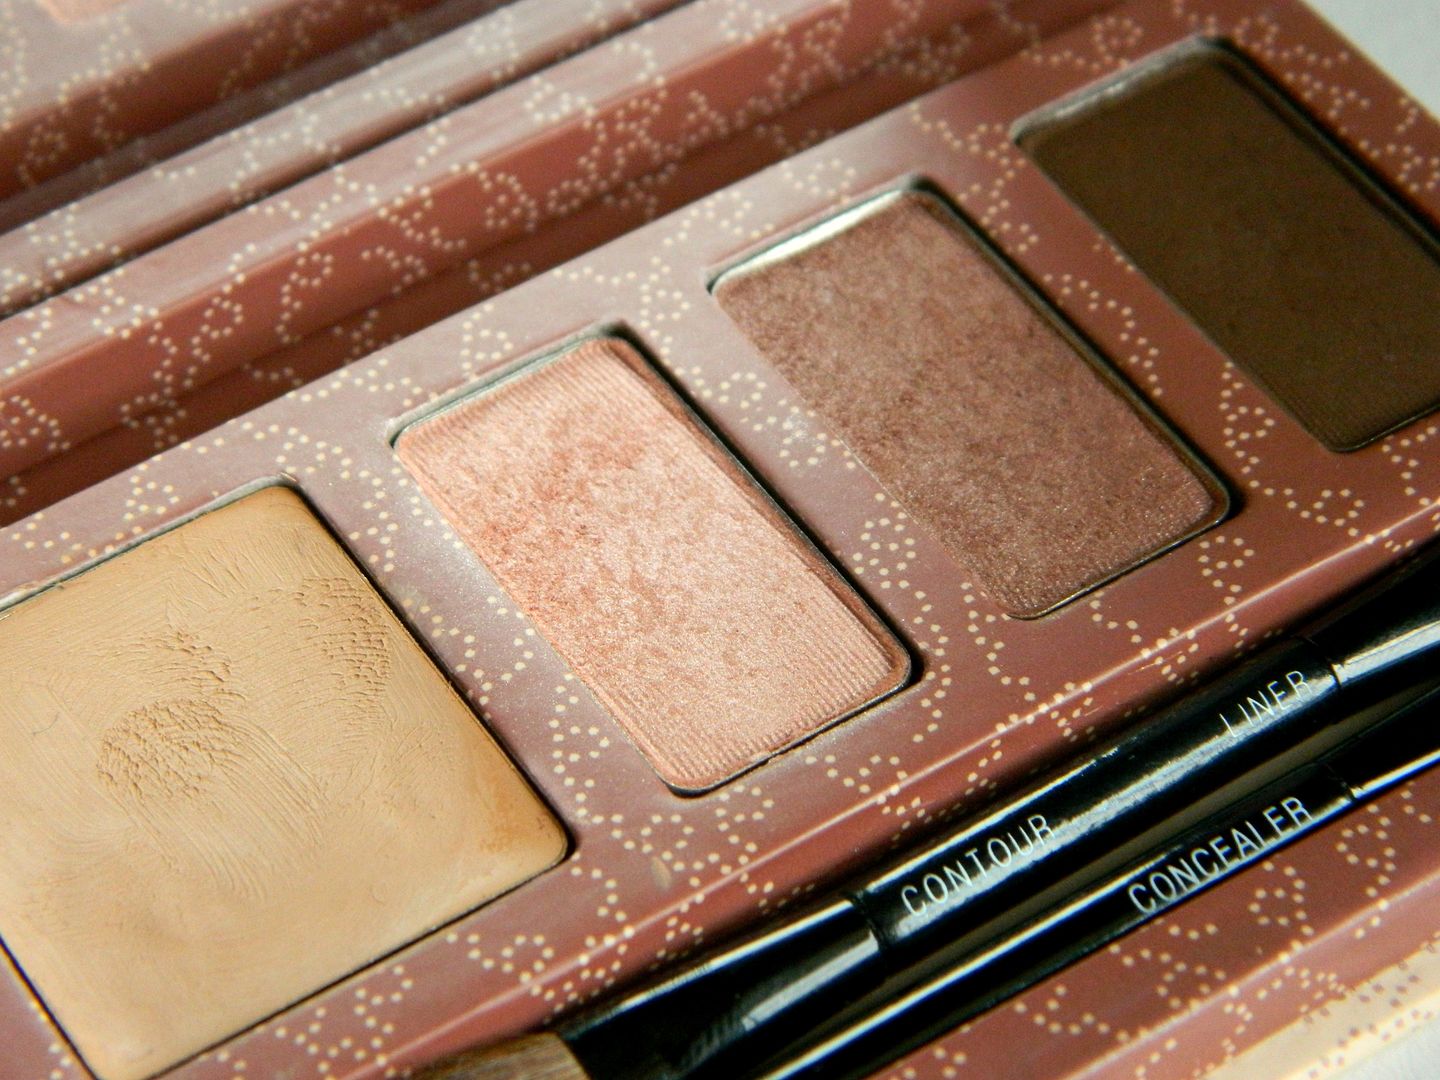 Benefit Big Beautiful Eyes Palette Close Up Review Belle-amie